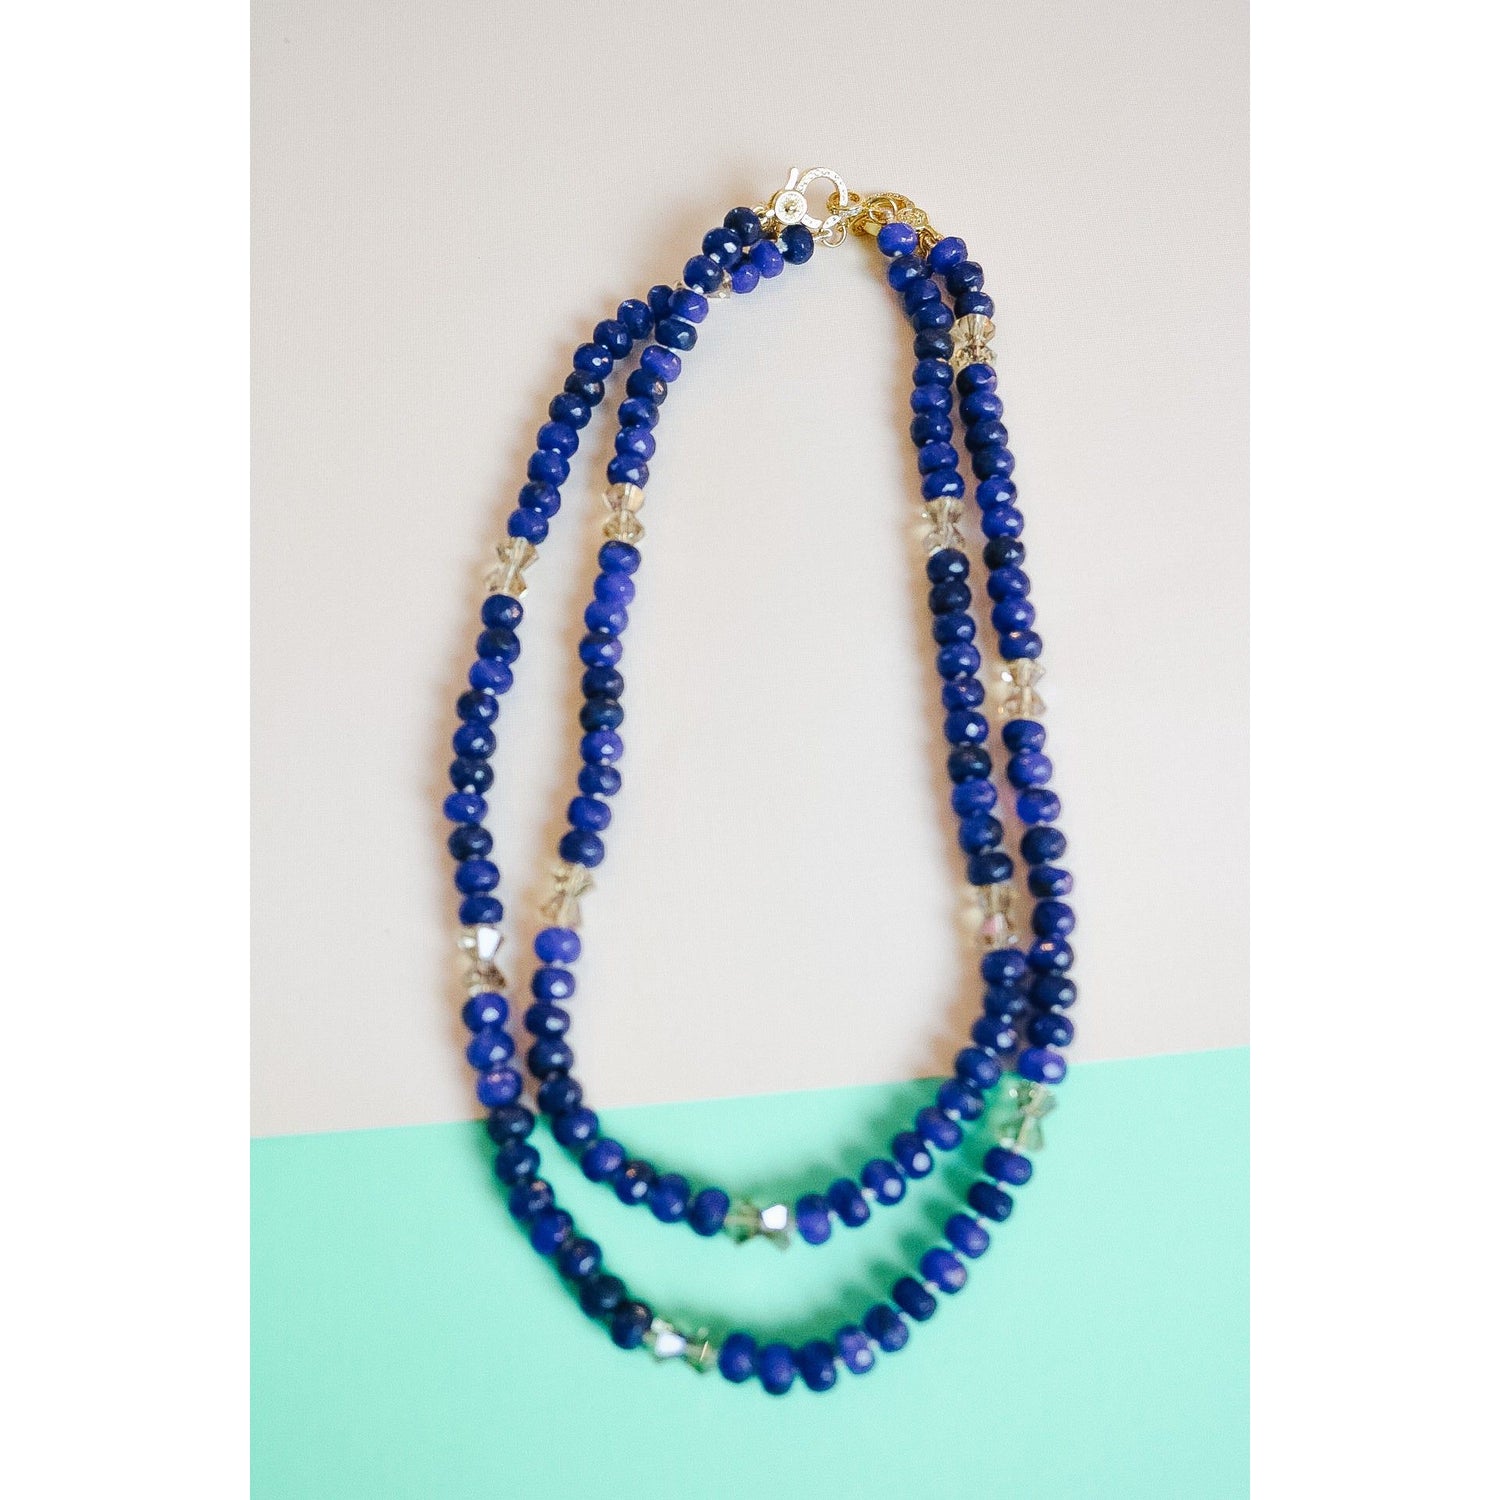 two lapis lazuli crystal bow necklaces shown styled, layered together.